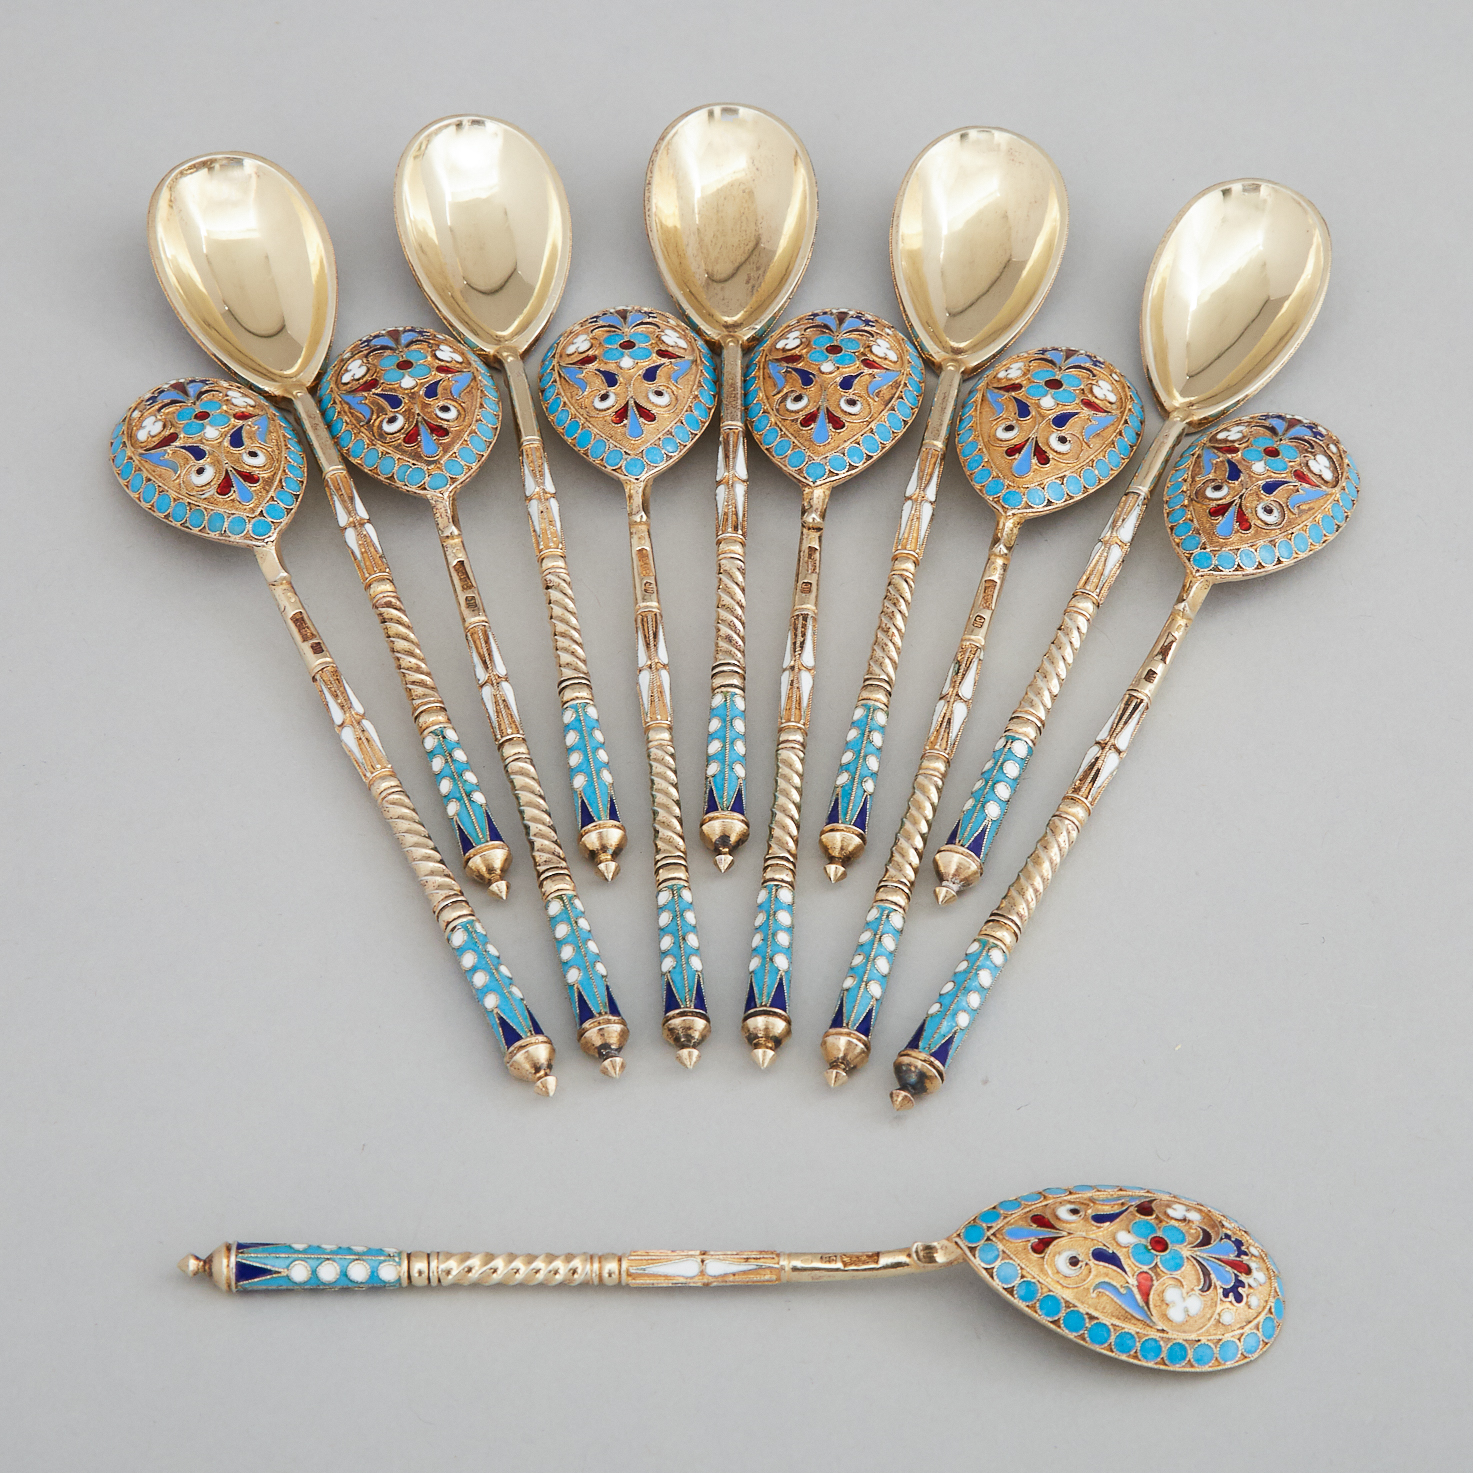 Set of Twelve Russian Cloisonné Enameled Silver-Gilt Tea Spoons, Moscow, late 19th century